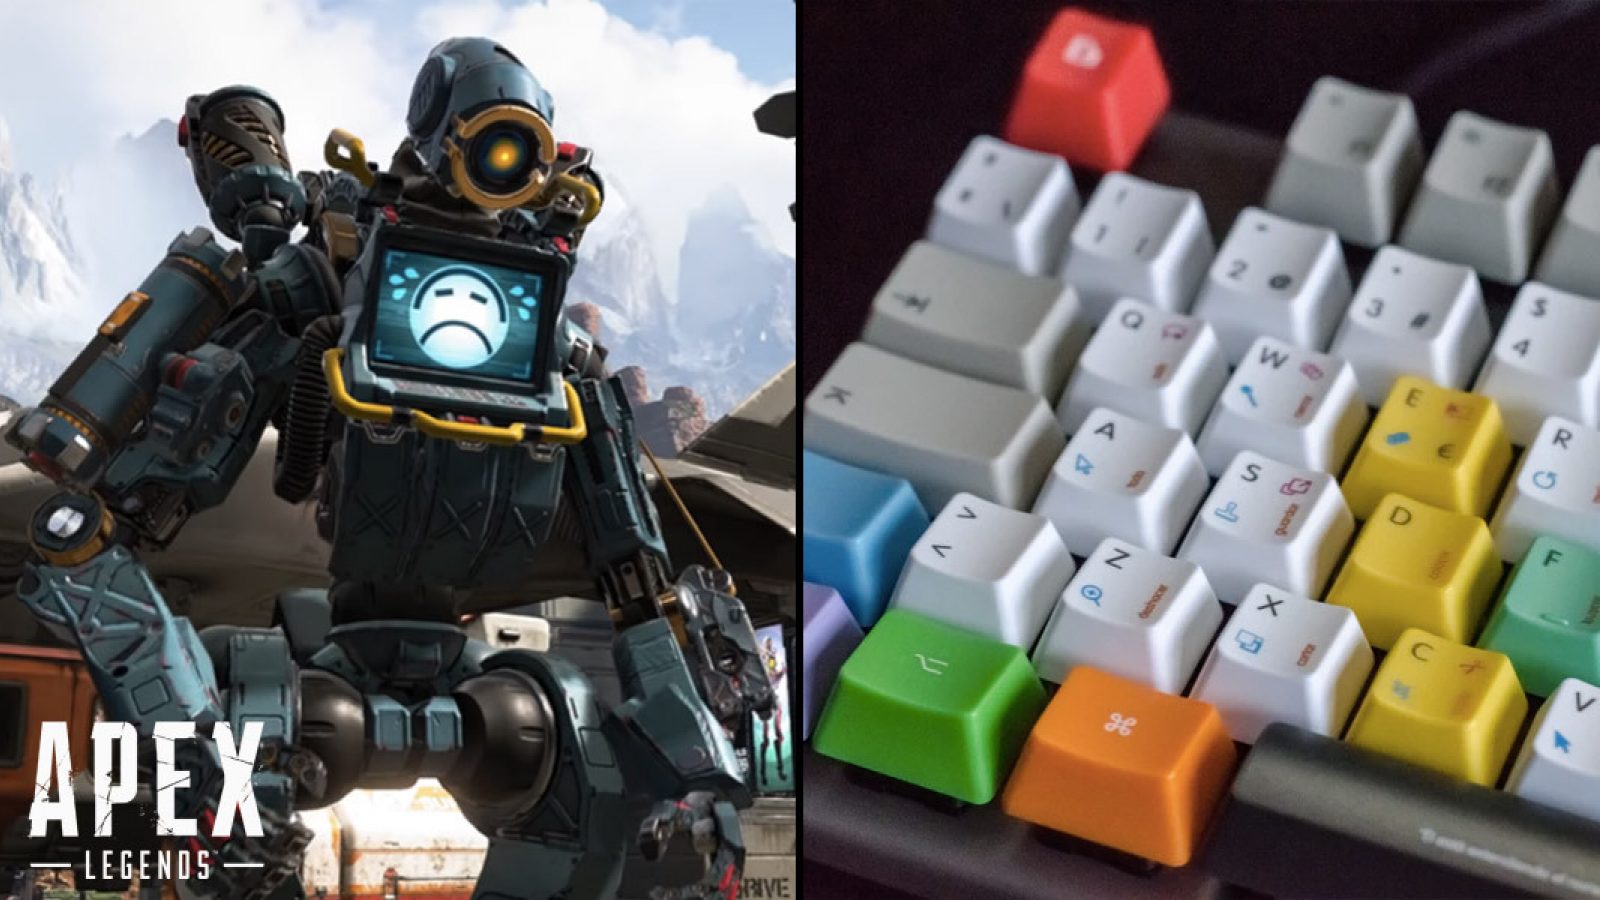 svælg Exert Bore Apex Legends: Respawn respond to controversy over using keyboard on console  - Dexerto